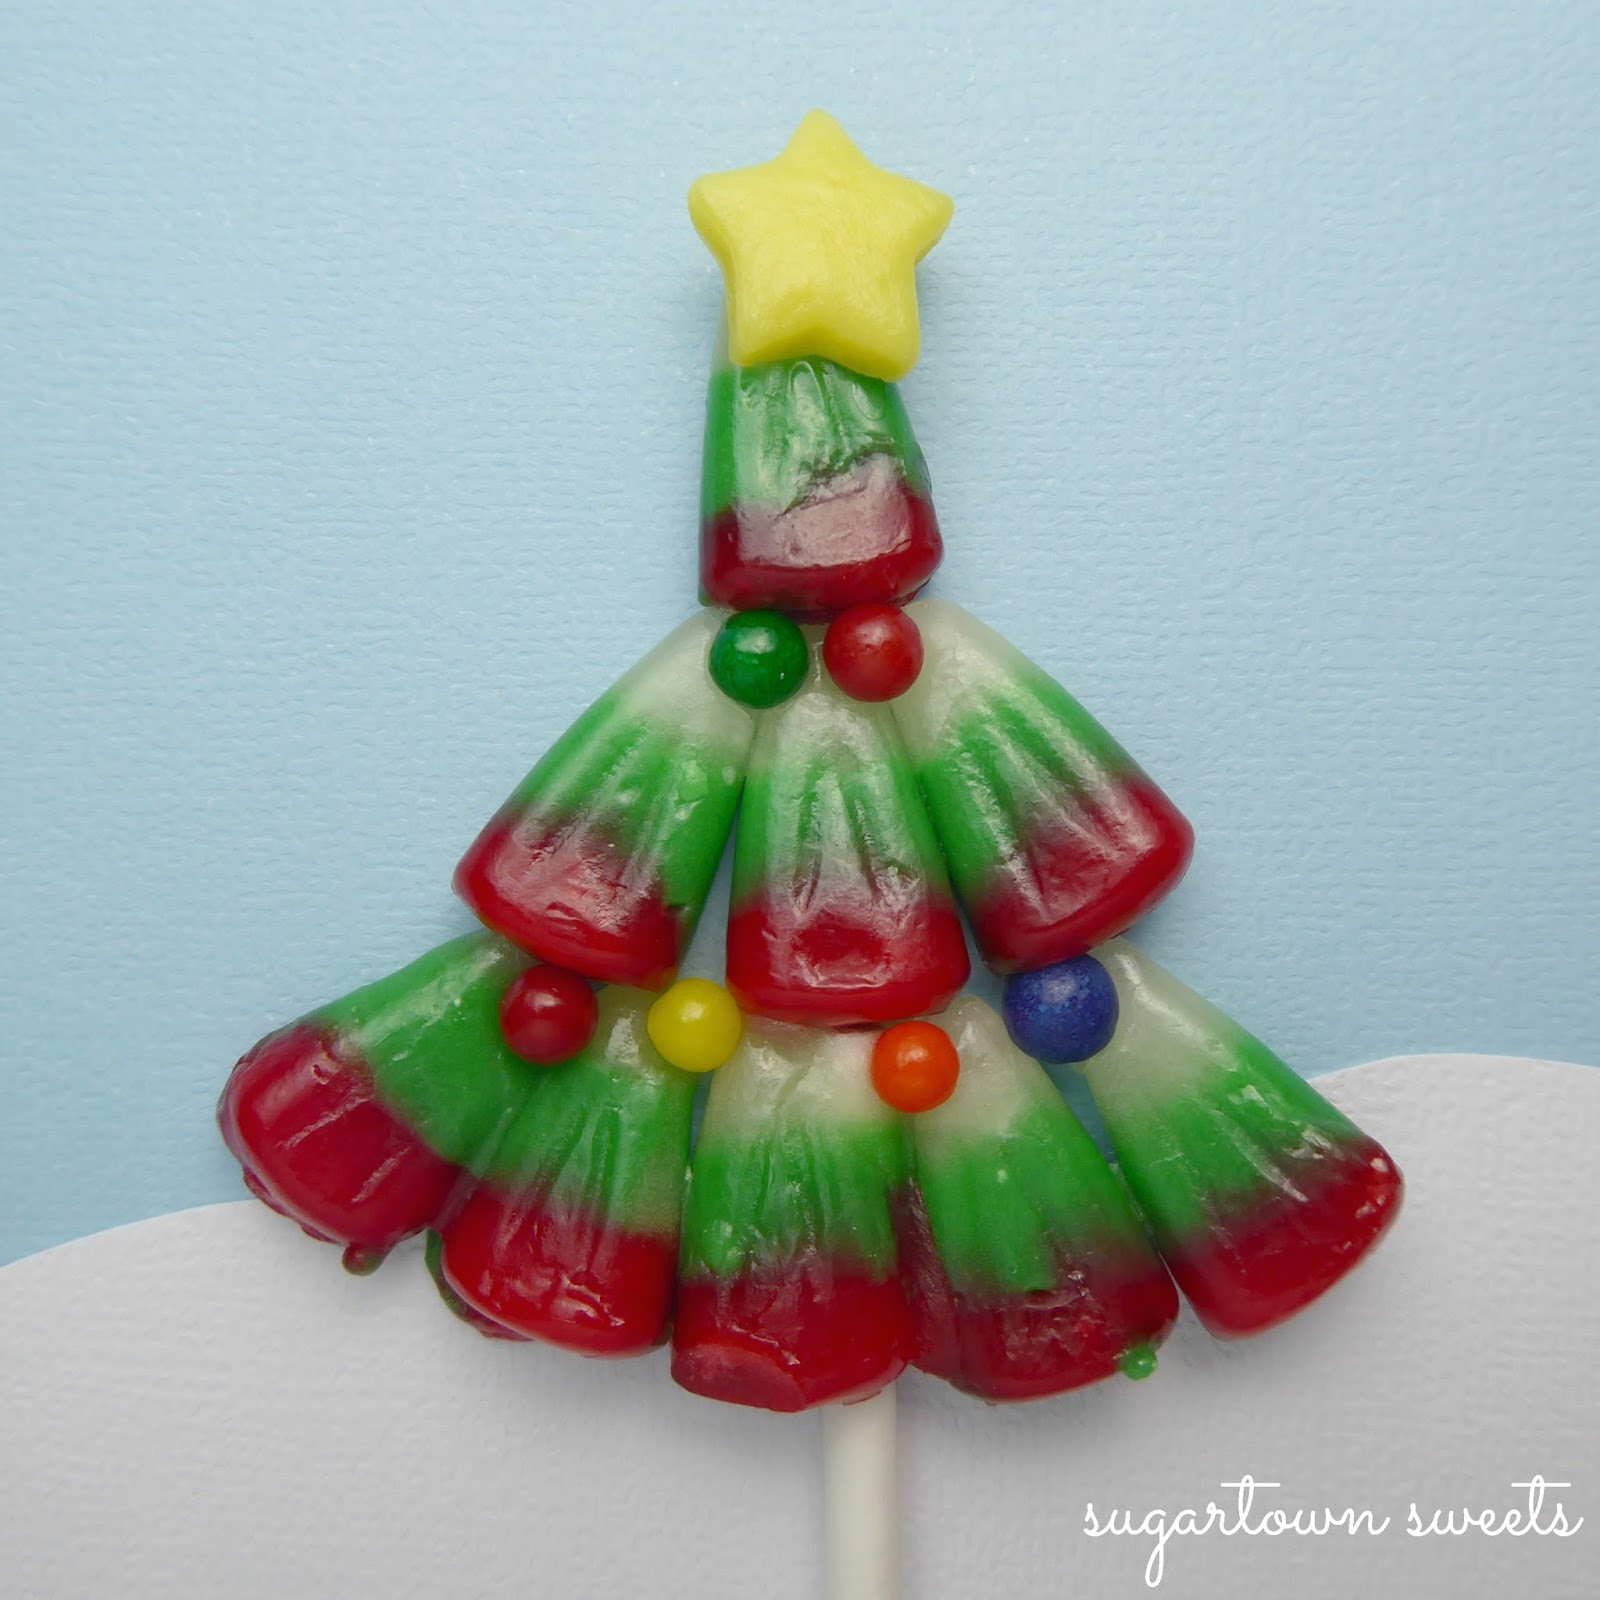 Christmas Candy Corn
 Sugartown Sweets Candy Corn Christmas Tree Pops